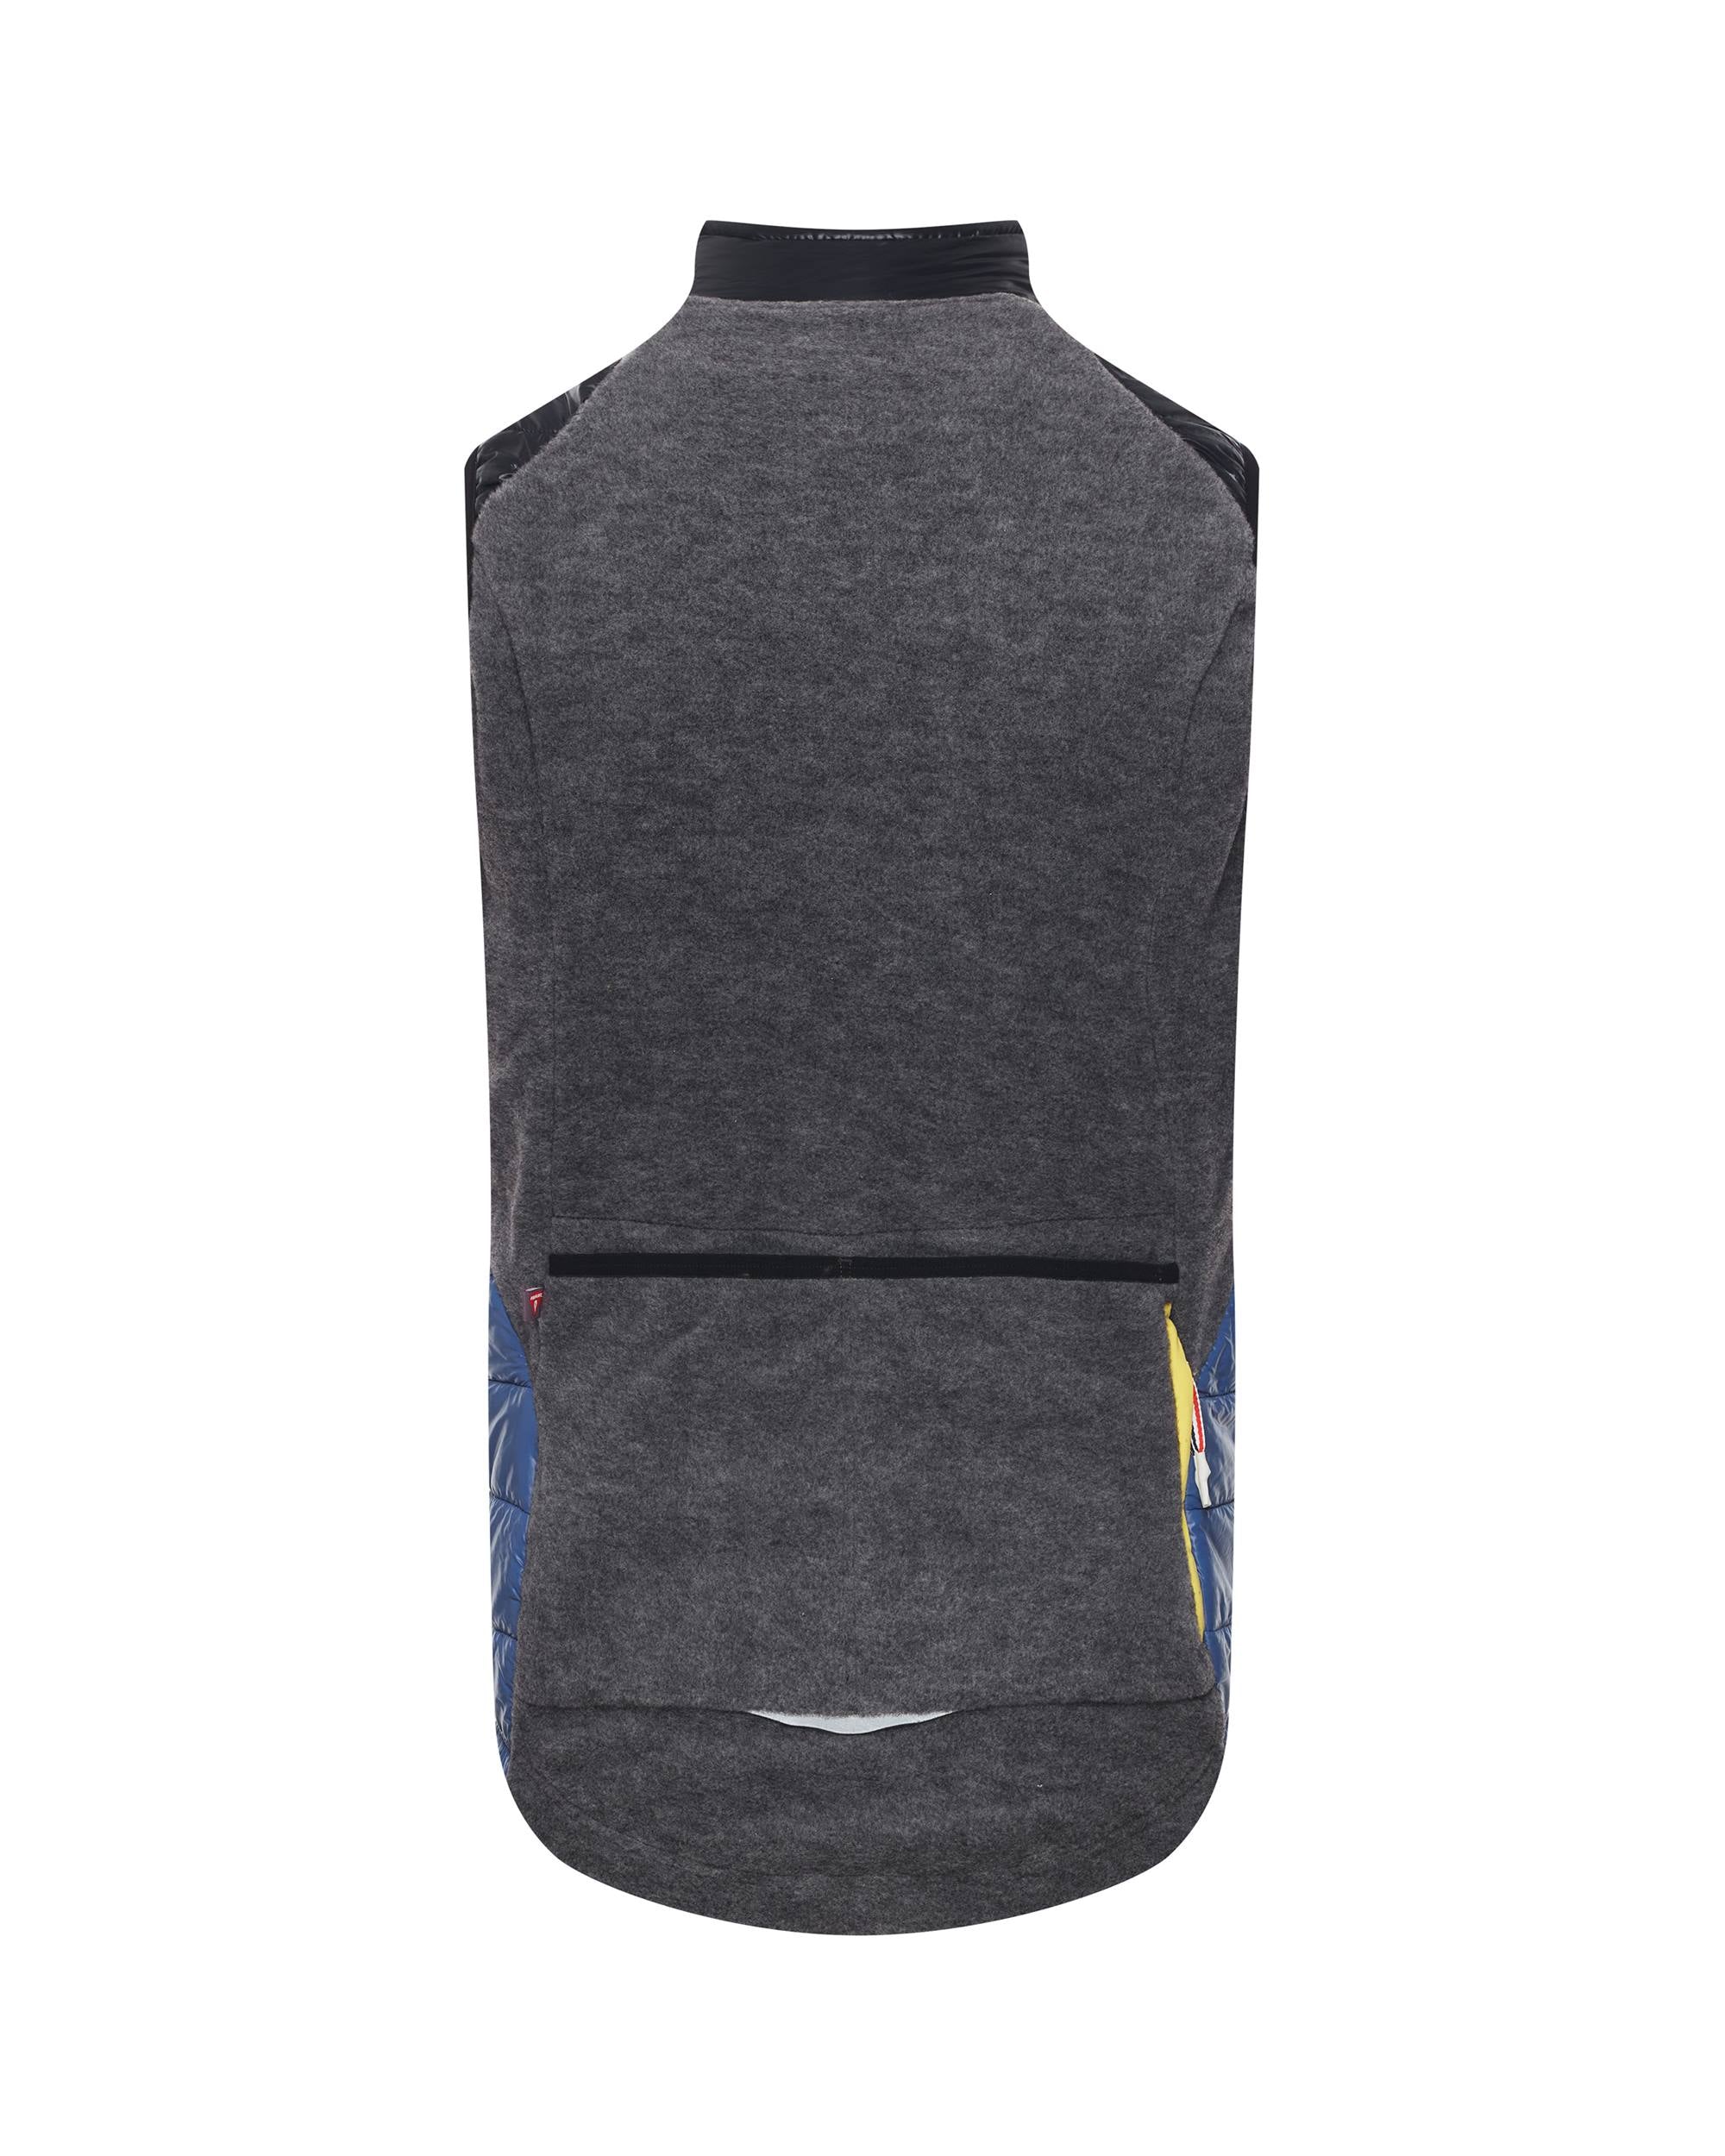 Albertine Thermal Cycling Vest